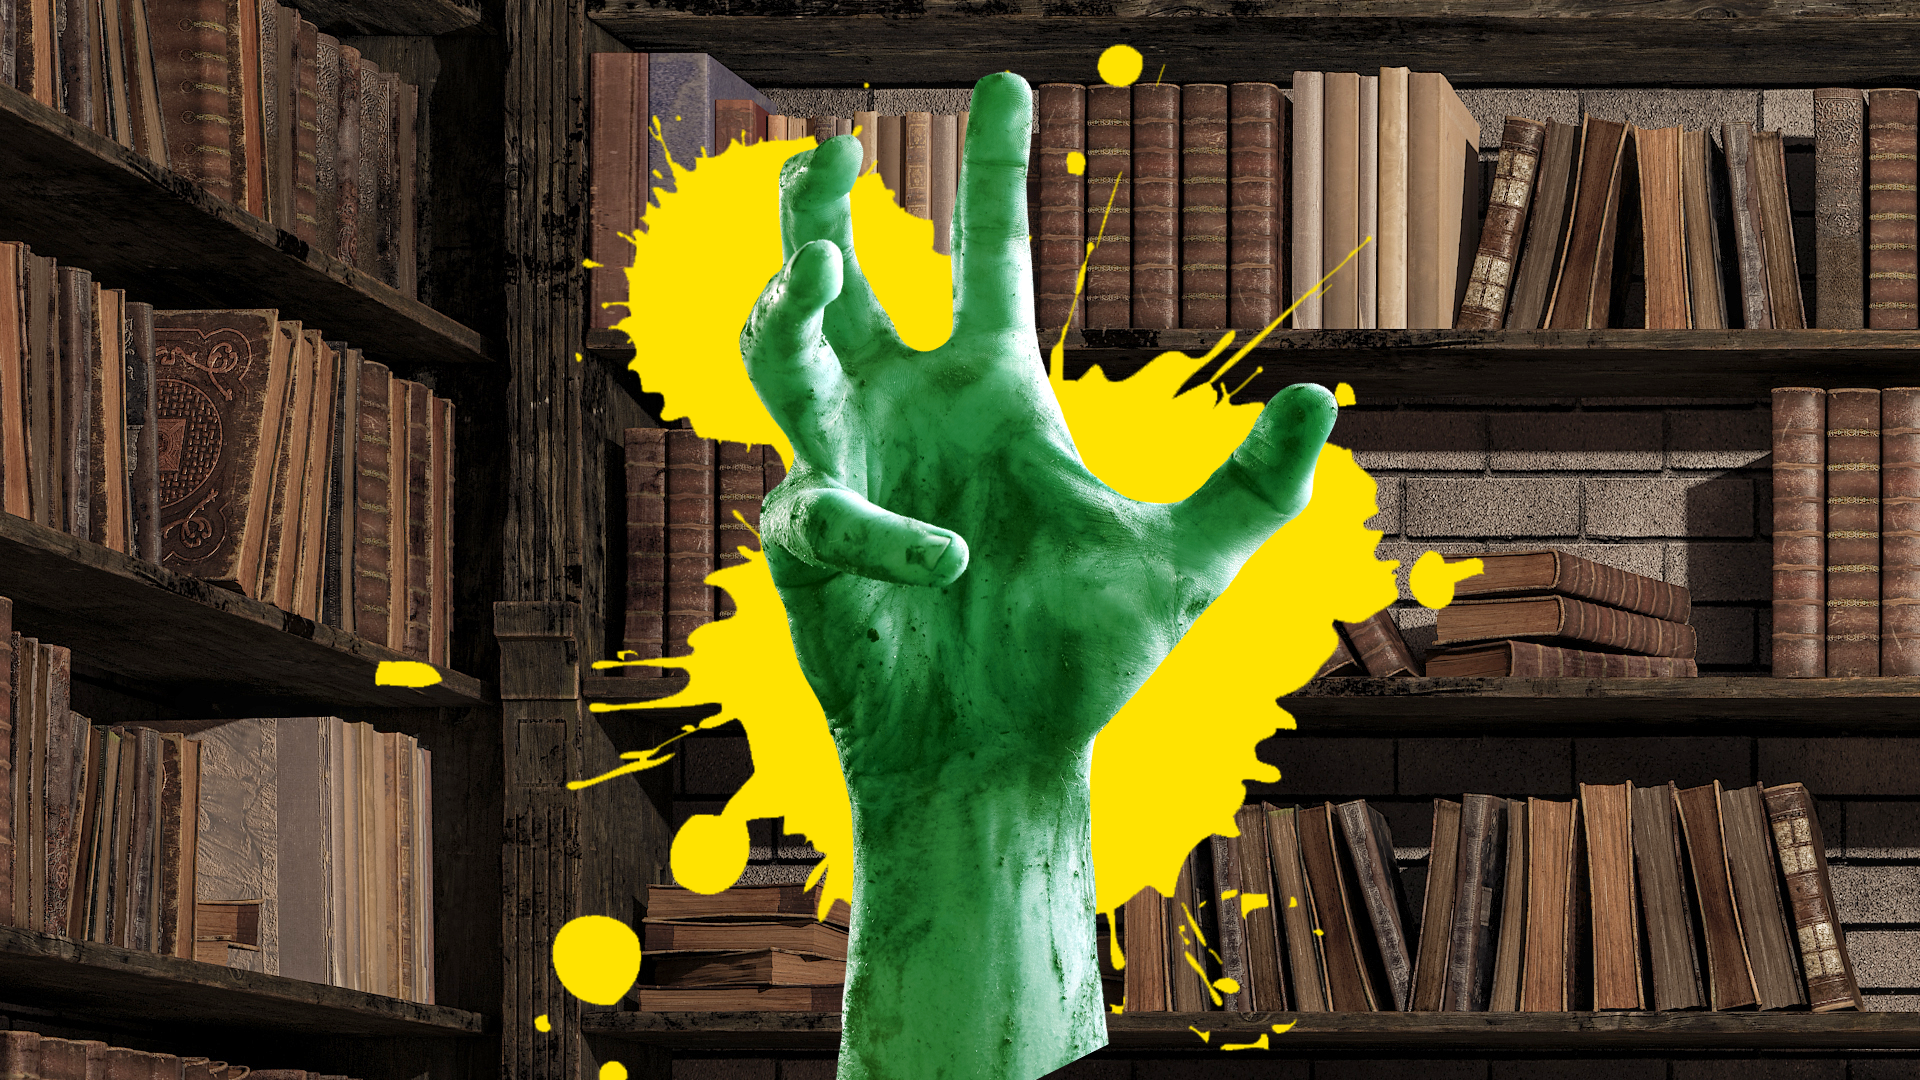 Zombie hand and splat on library background